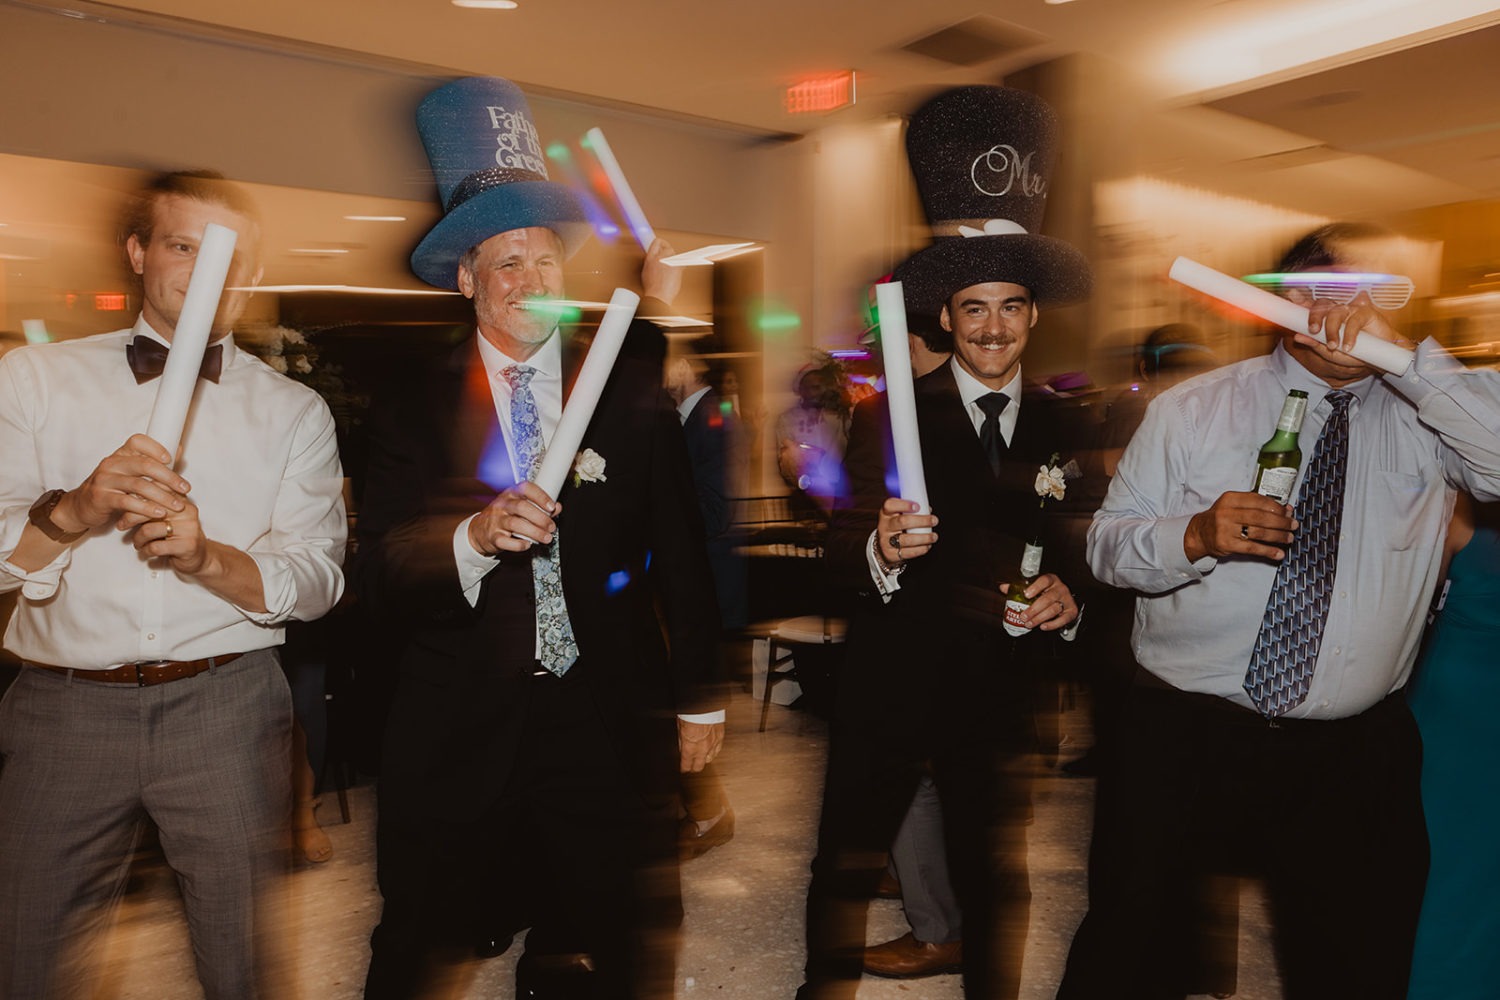 guests dance with glow sticks and hats at wedding reception dance party